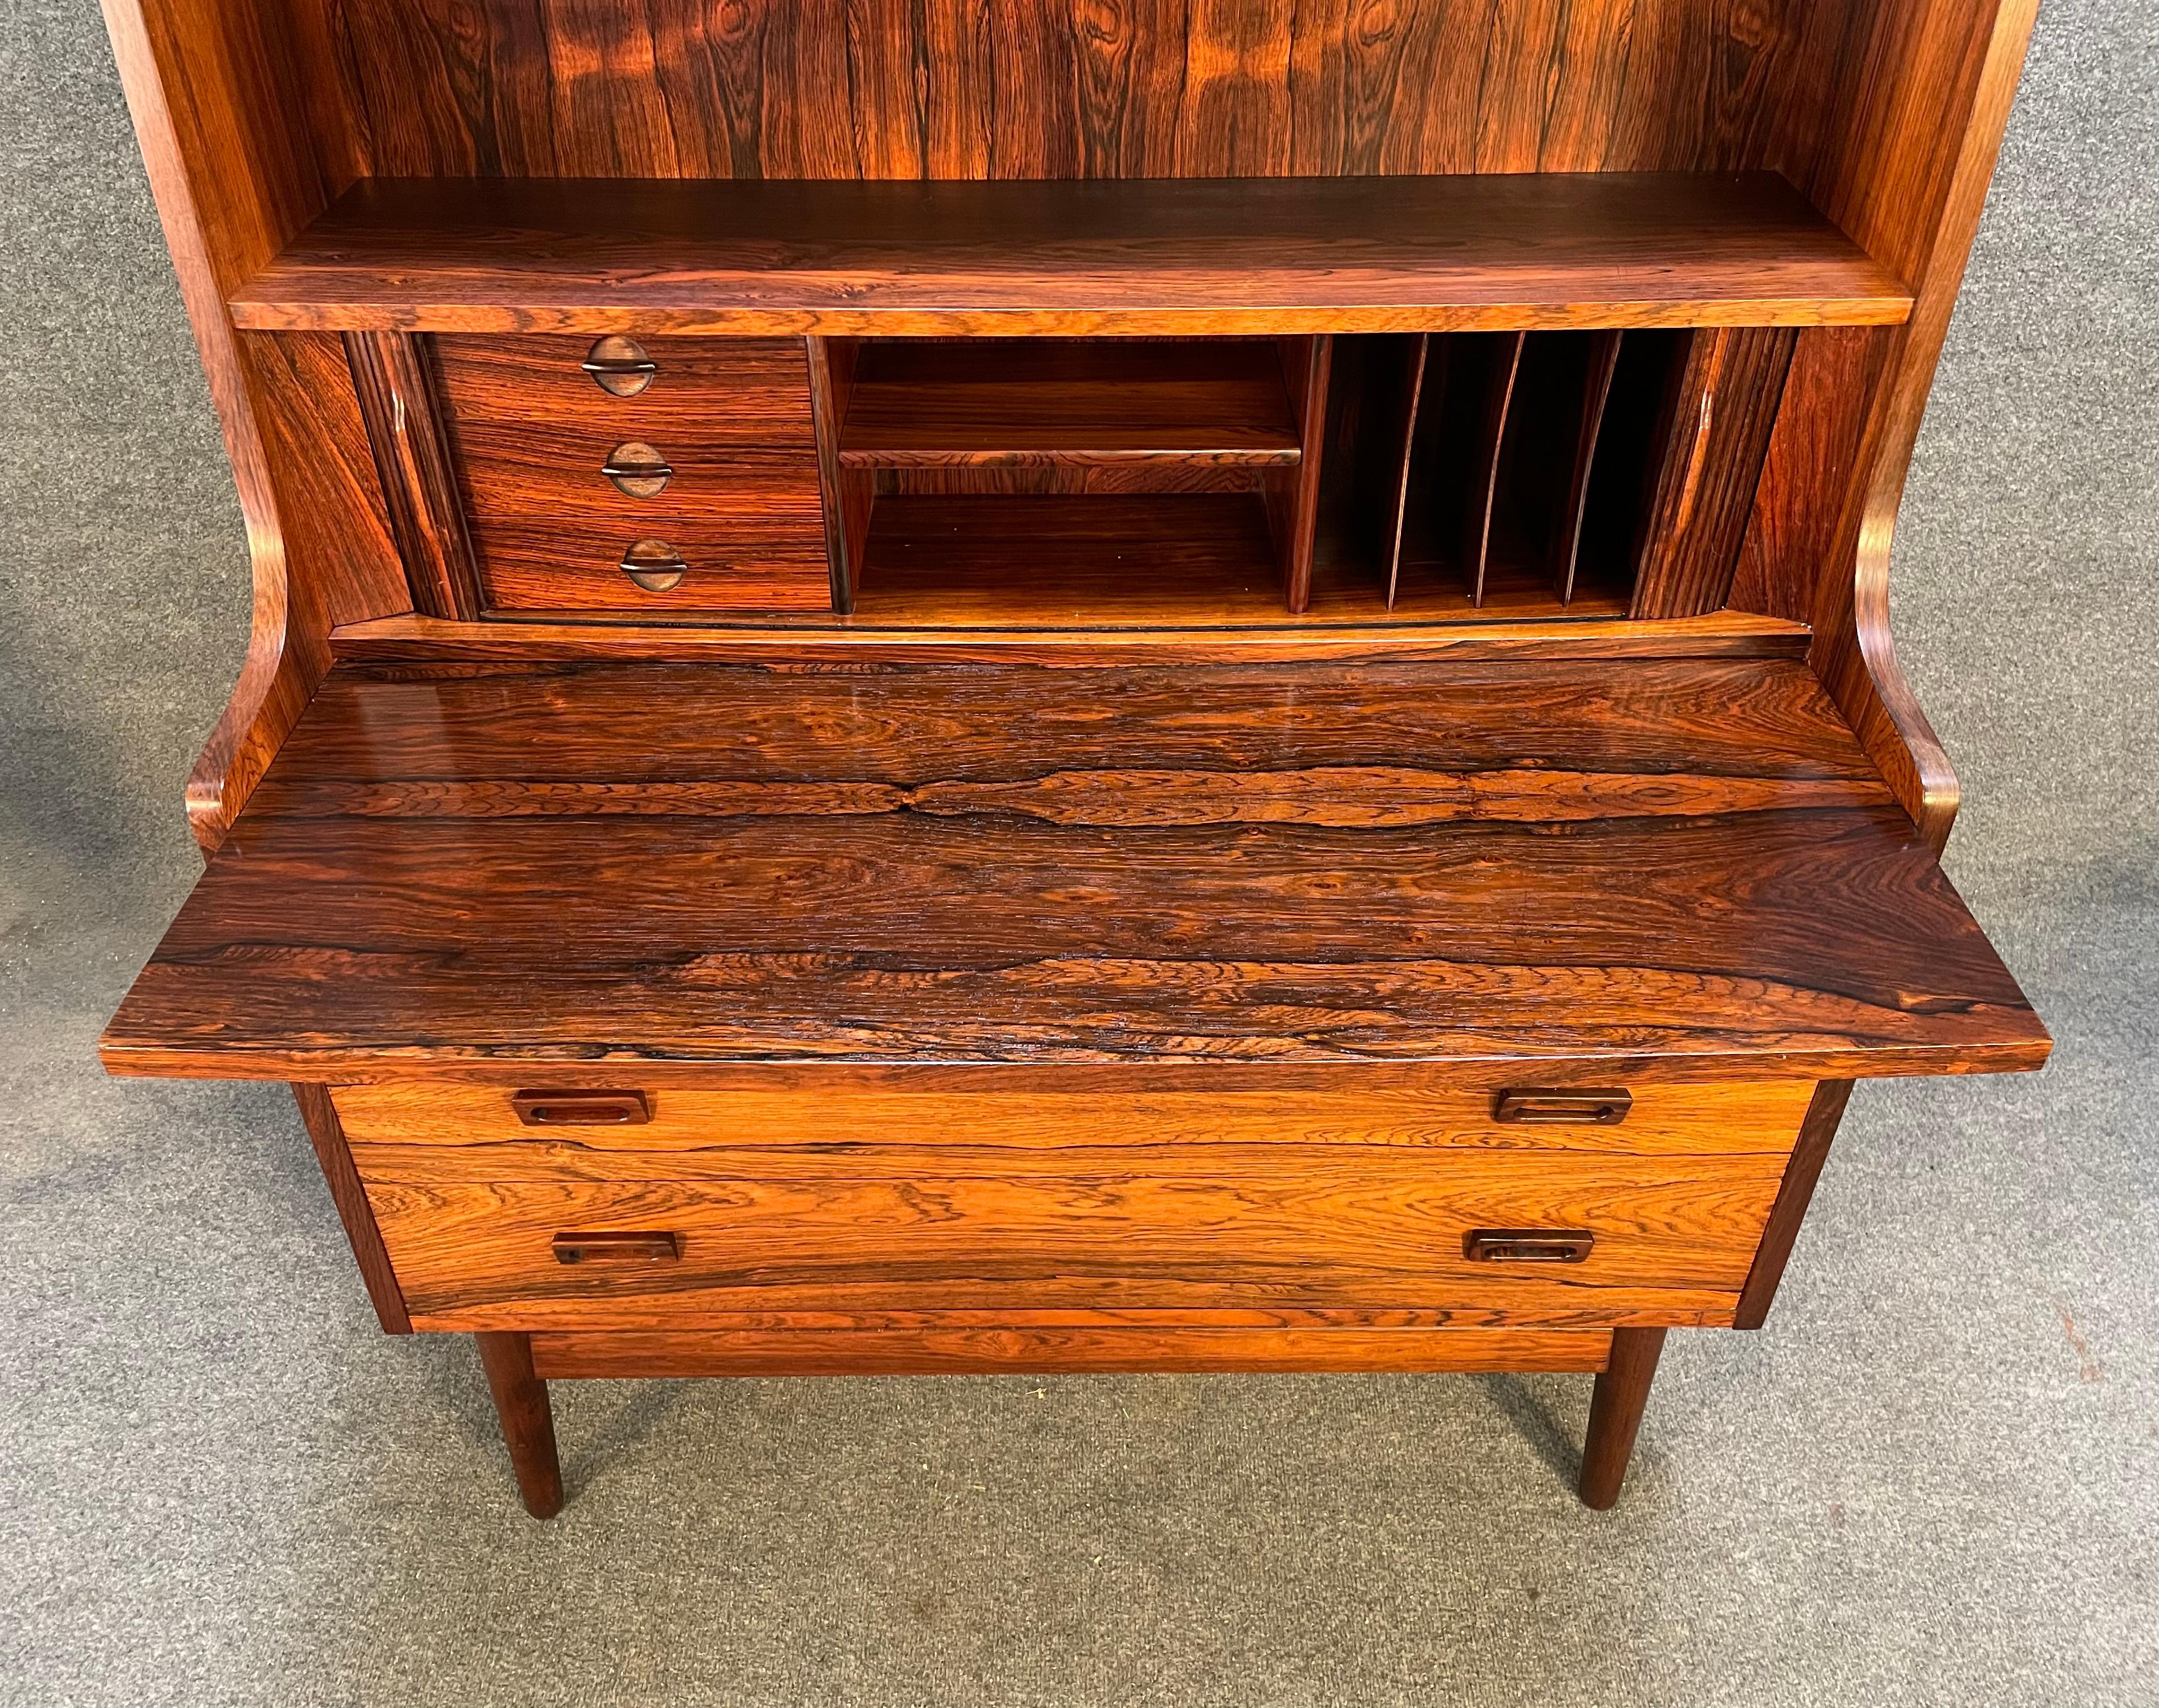 Here is a very sought after Scandinavian modern secretary desk designed by Johannes Sorth for Nexxo Mobelfabrik in Denmark in the 1960's. This exquisite piece, in Brazilian rosewood, features in the center two tambour doors with three small drawers